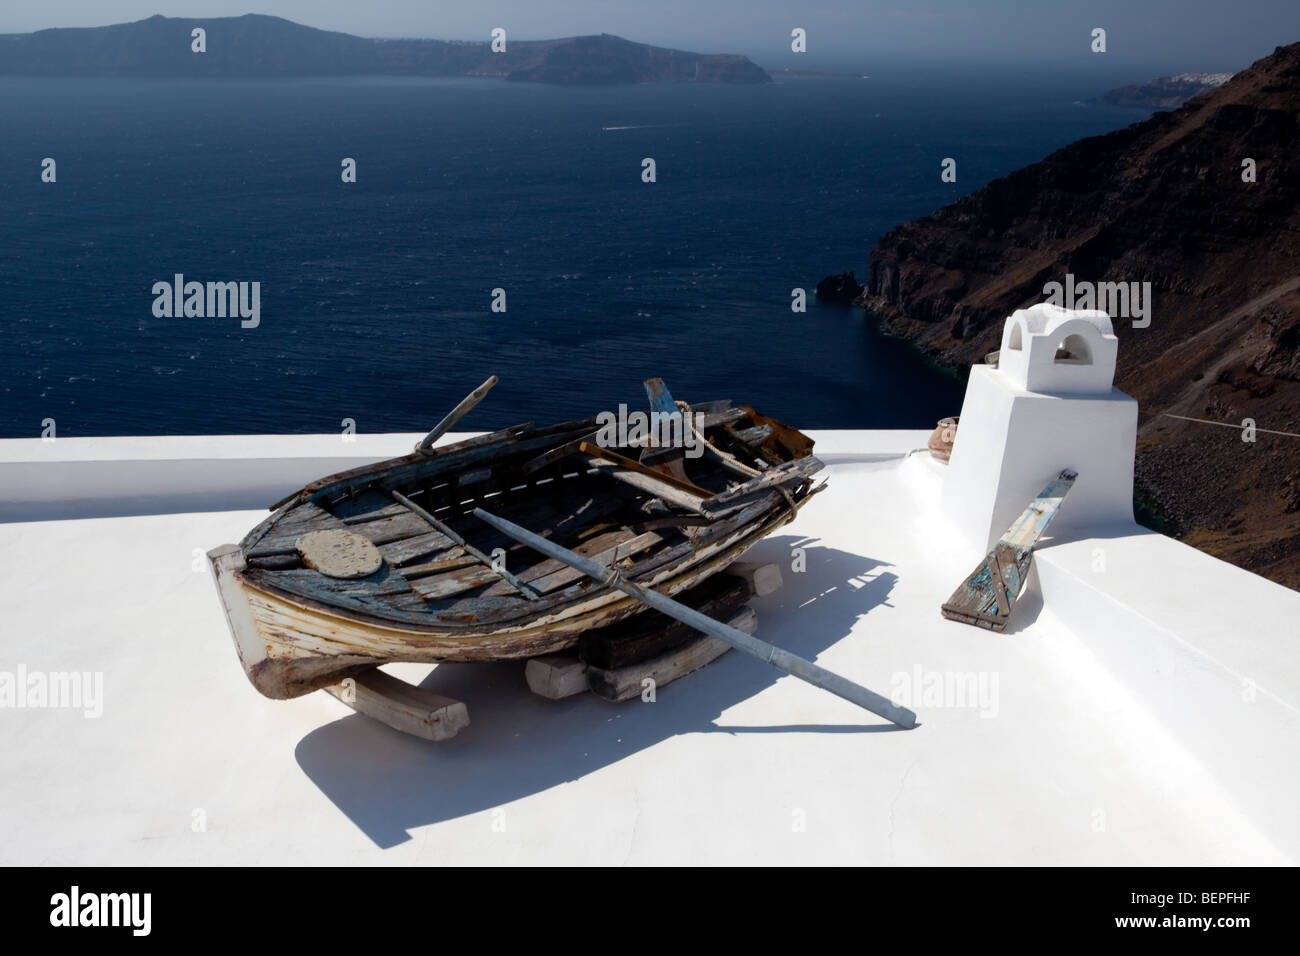 One of sights of island Santorini - an old boat on a roof of one of houses. Stock Photo